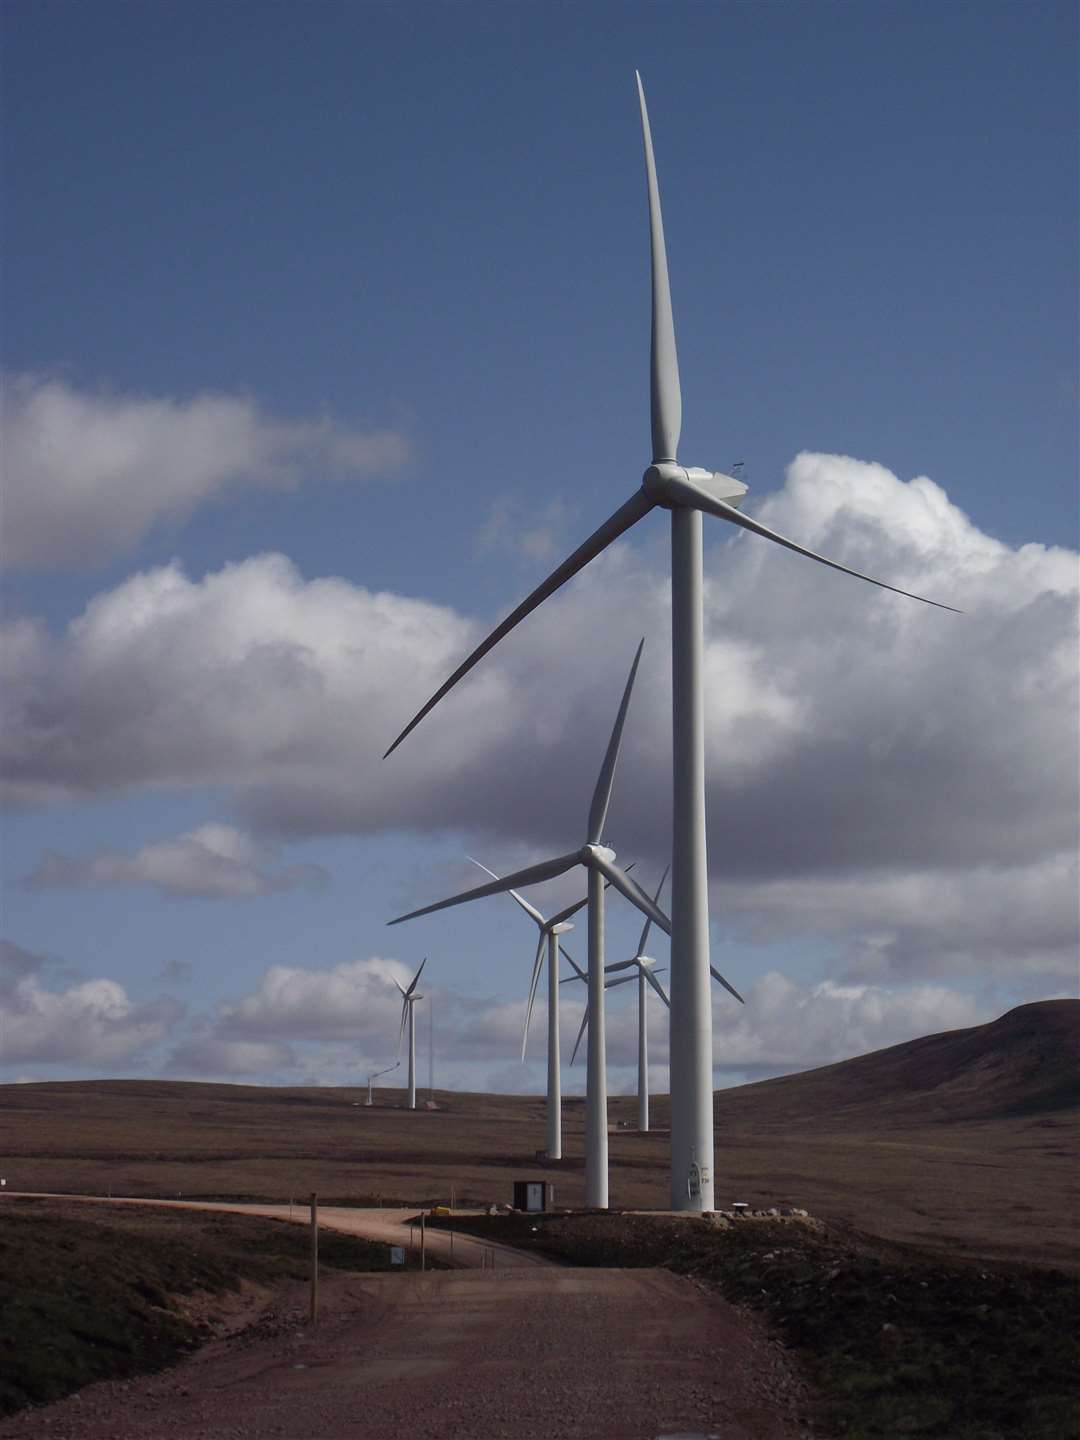 More turbines will be built at Gordonbush Wind Farm - without government subsidy.